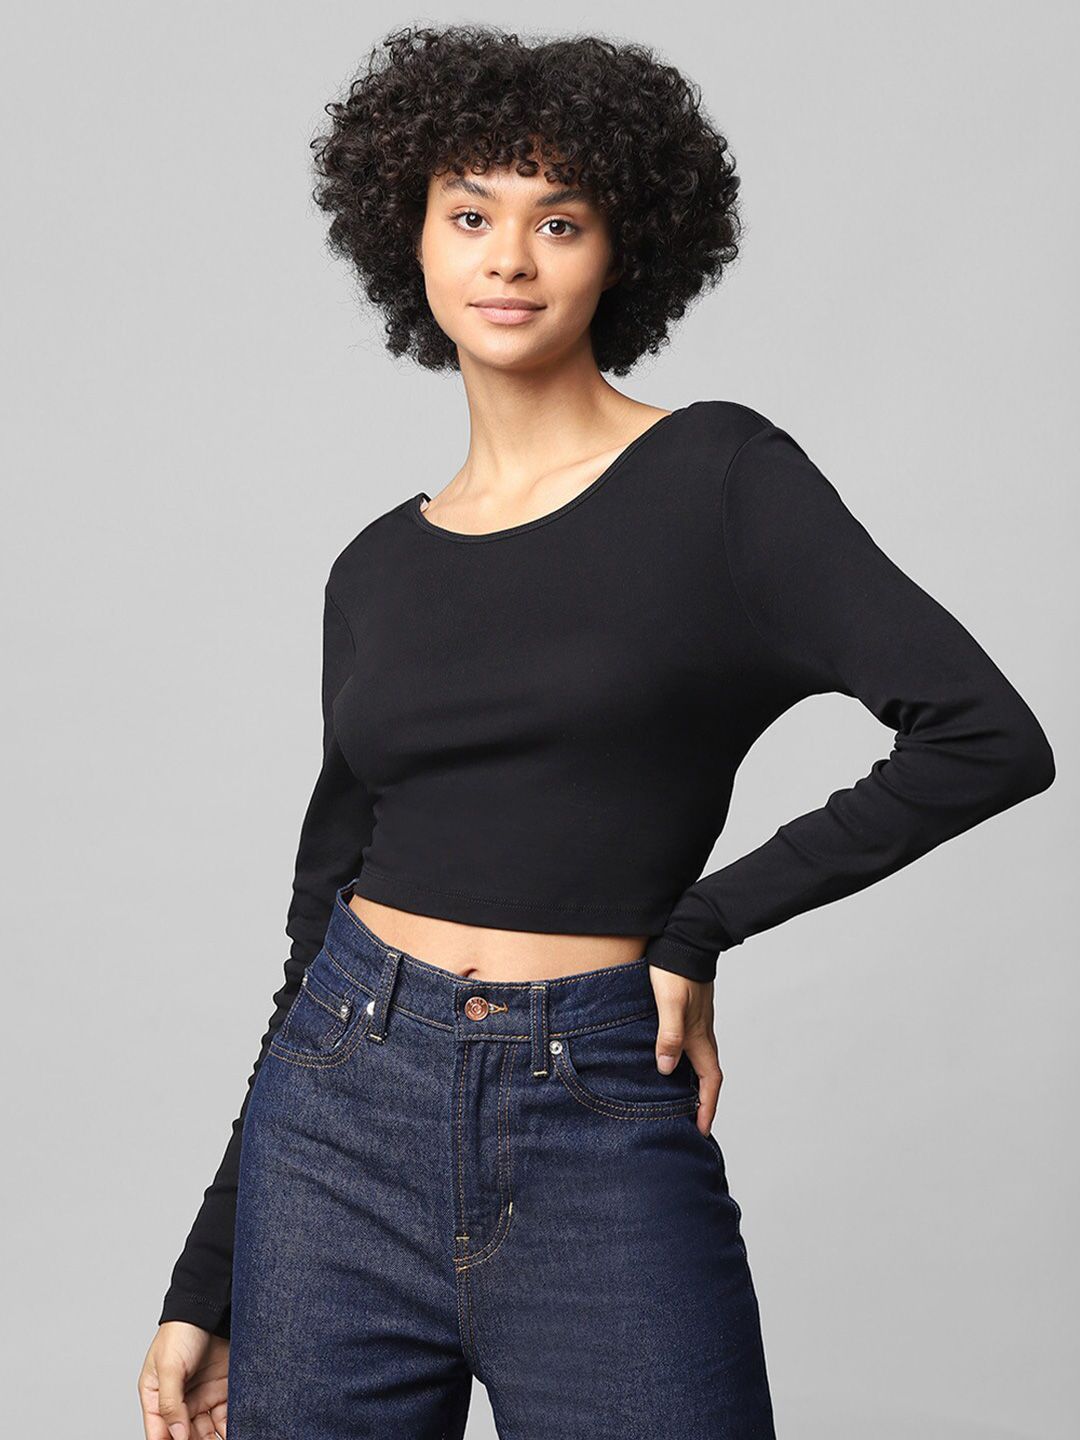 ONLY Women Black Solid Full Sleeve Crop Top Price in India